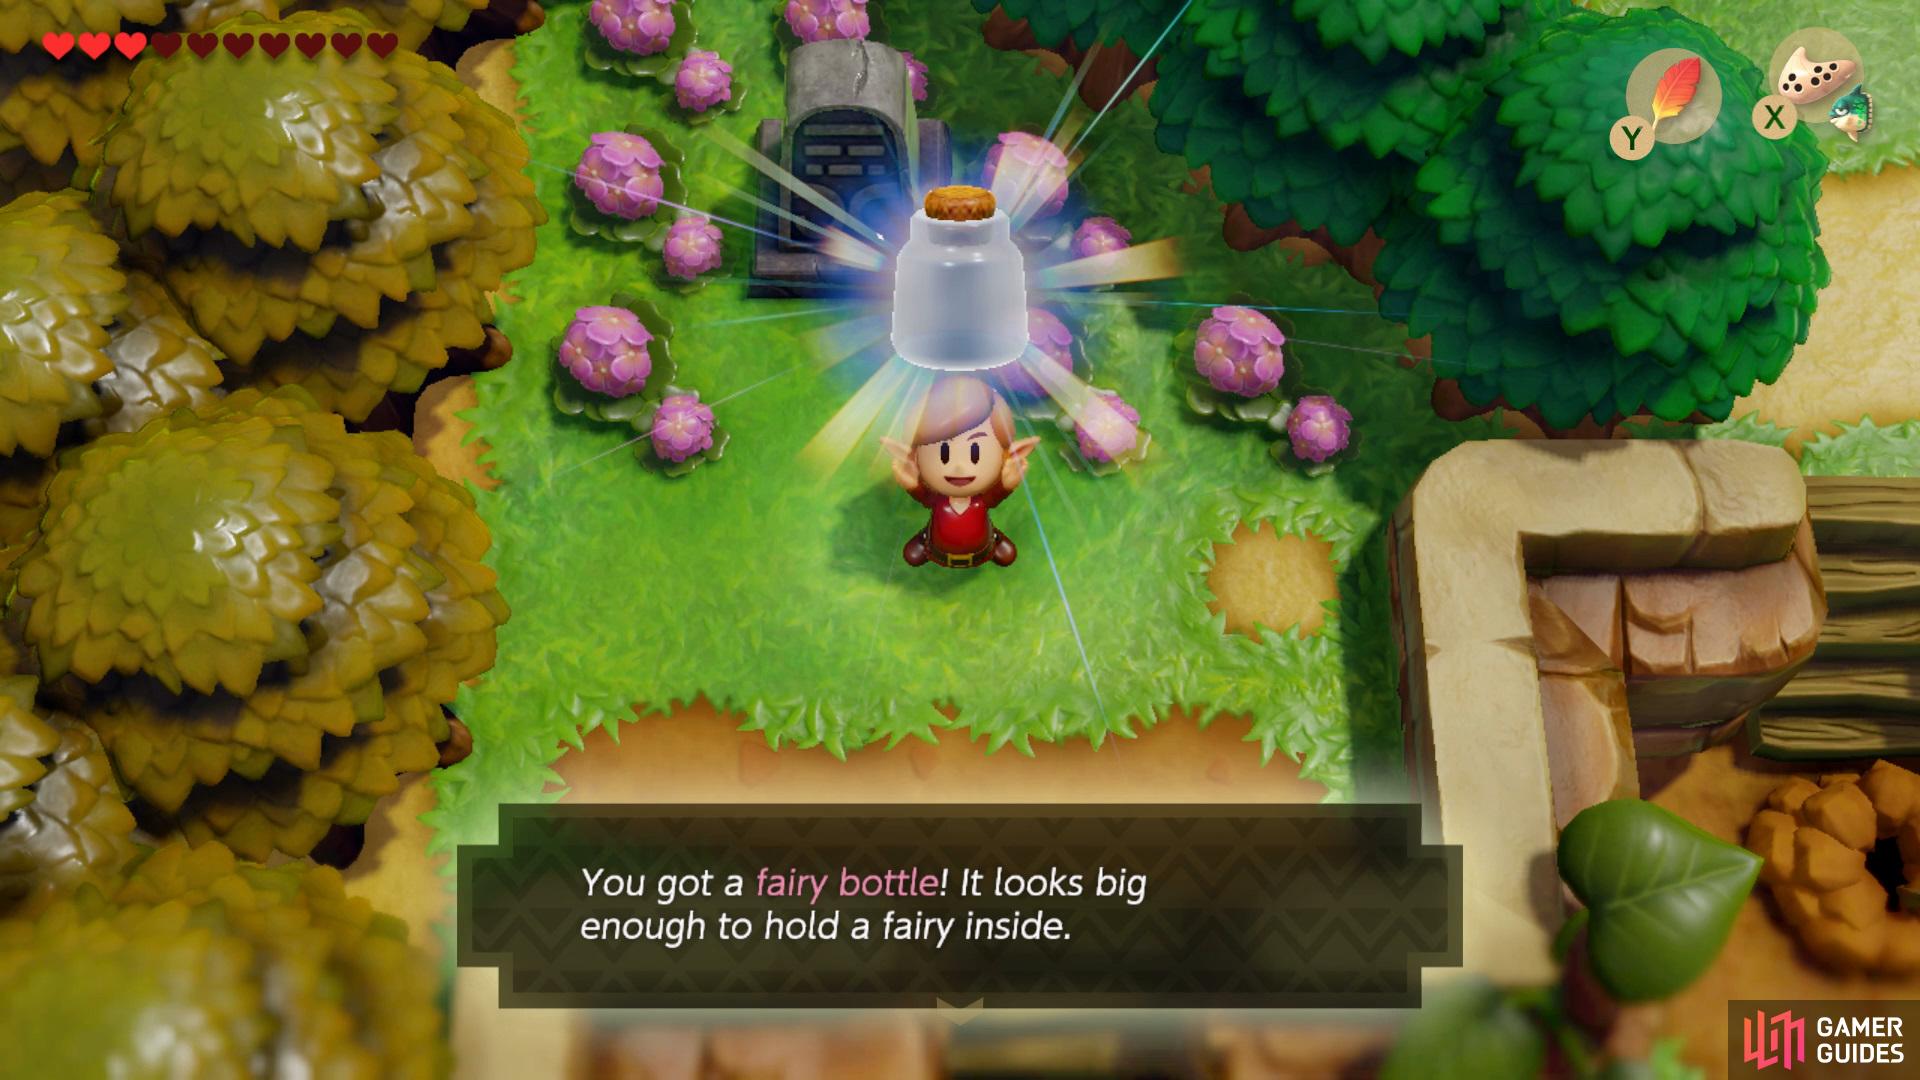 and collect your Fairy Bottle for your reward.